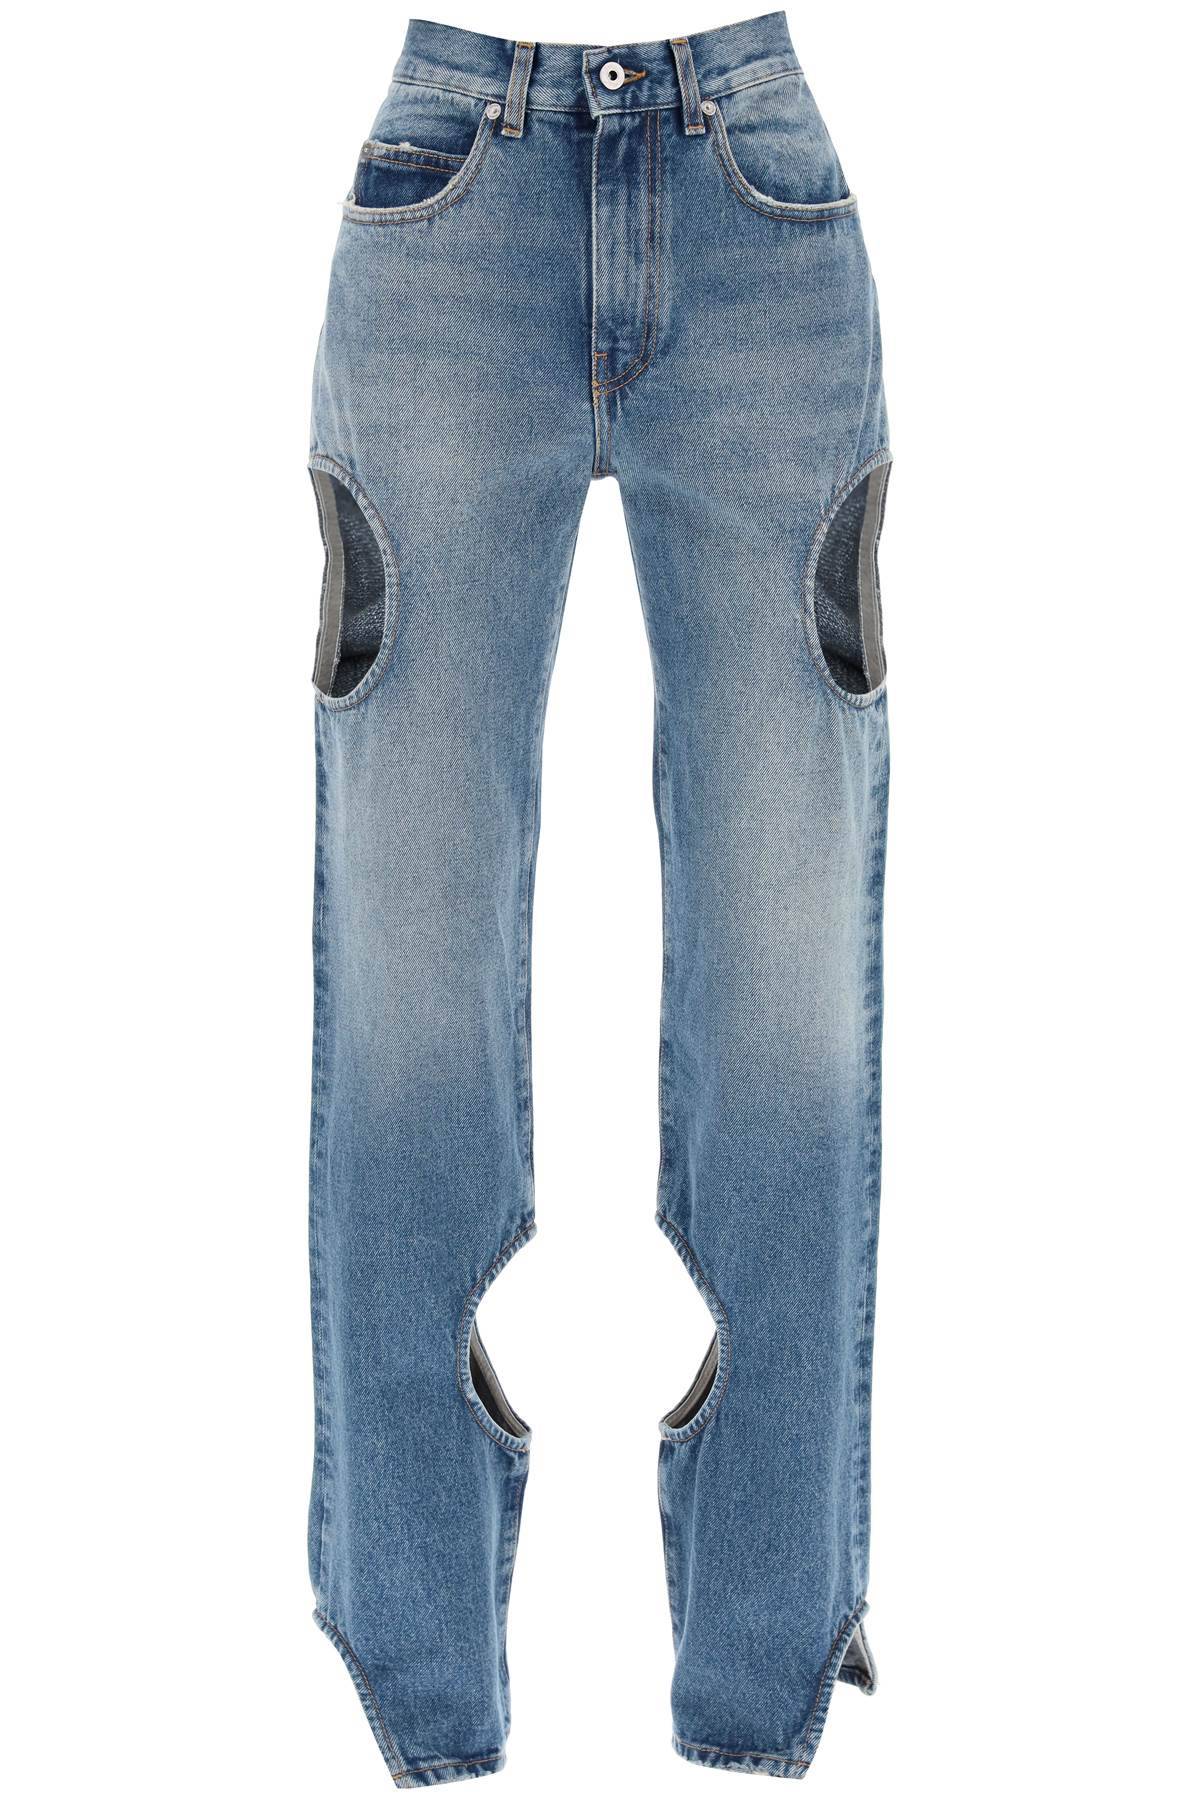 OFF-WHITE OFF-WHITE meteor cut-out jeans